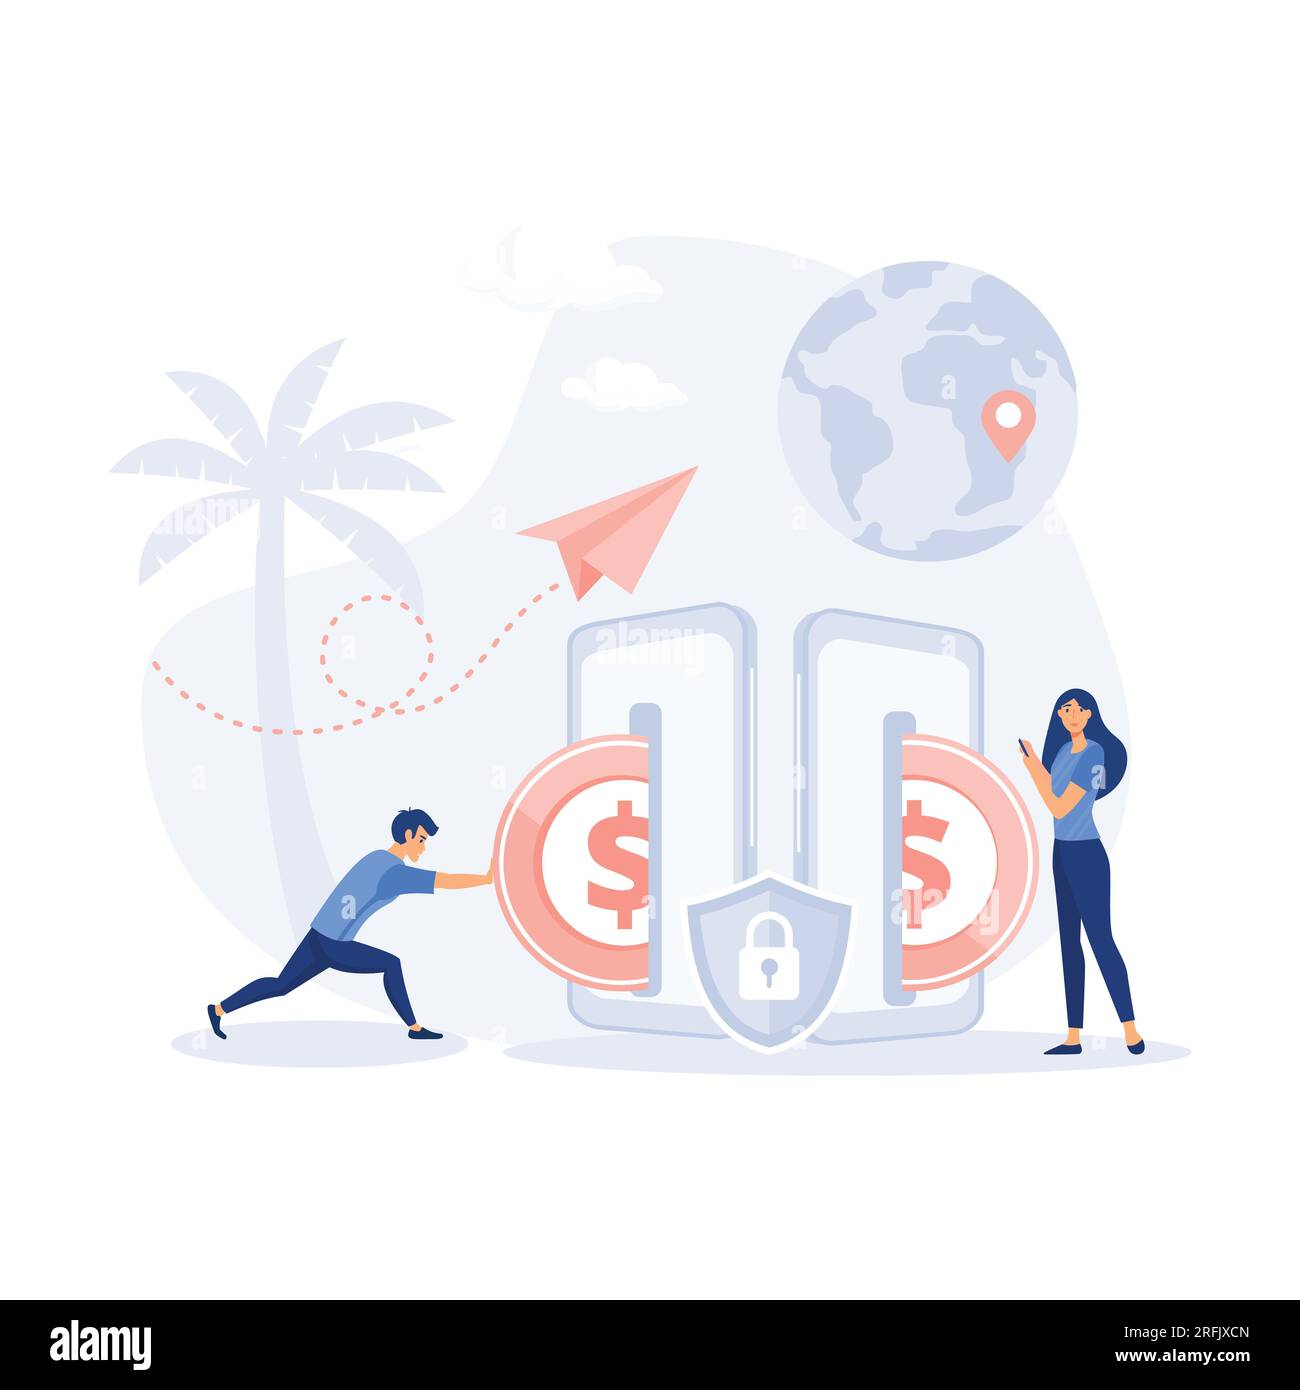 transfers money. successful contactless payment transaction, flat modern vector illustration Stock Vector